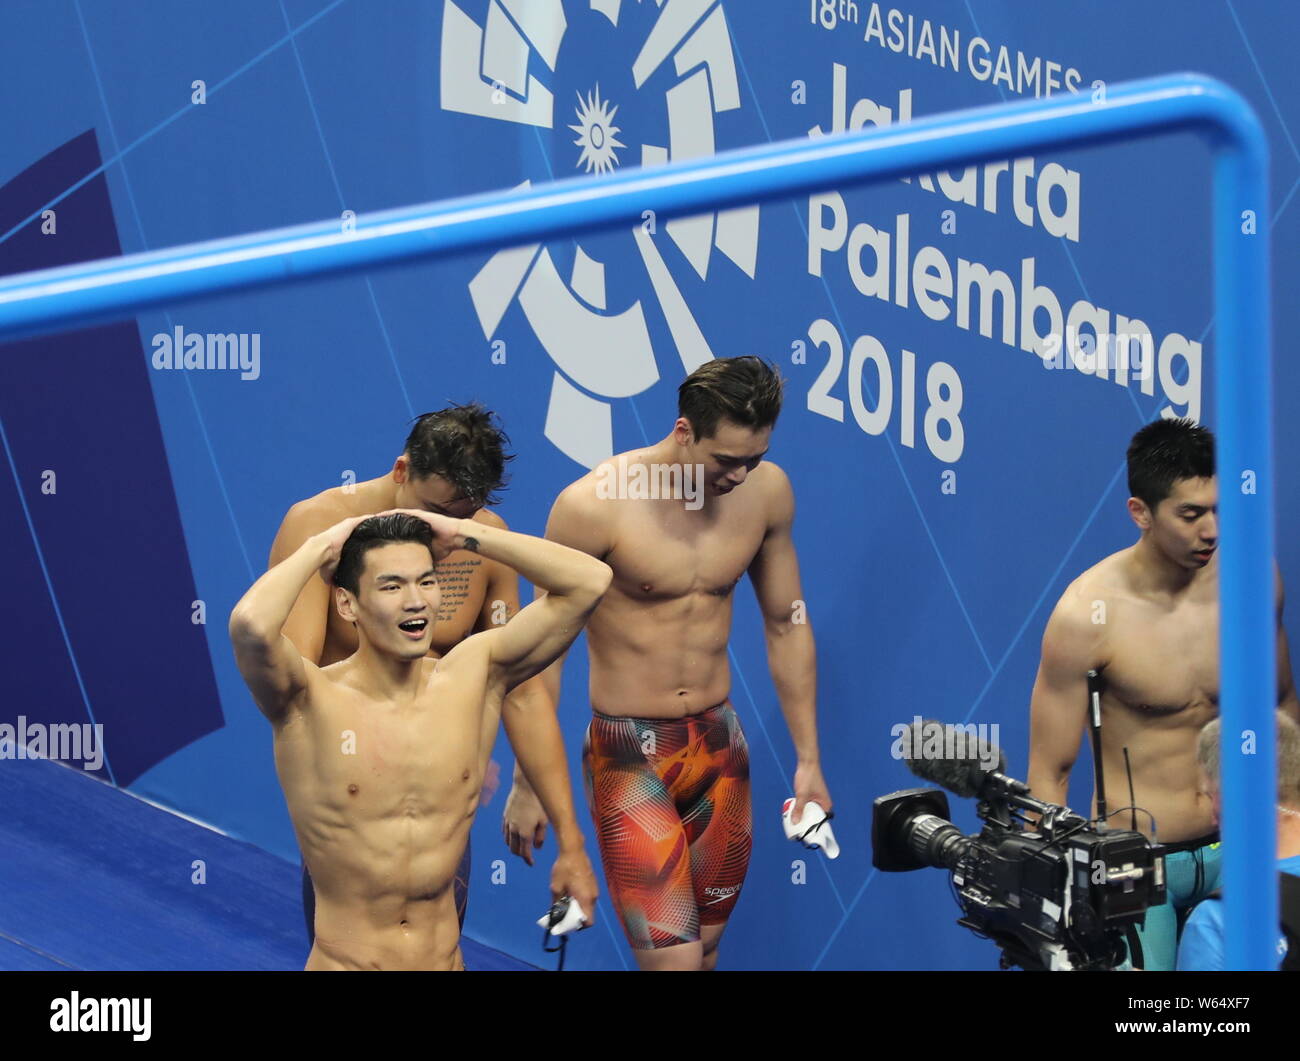 Chinese swimmers celebrate after winning the men's 4x100 medley relay swimming final during the 2018 Asian Games, officially known as the 18th Asian G Stock Photo